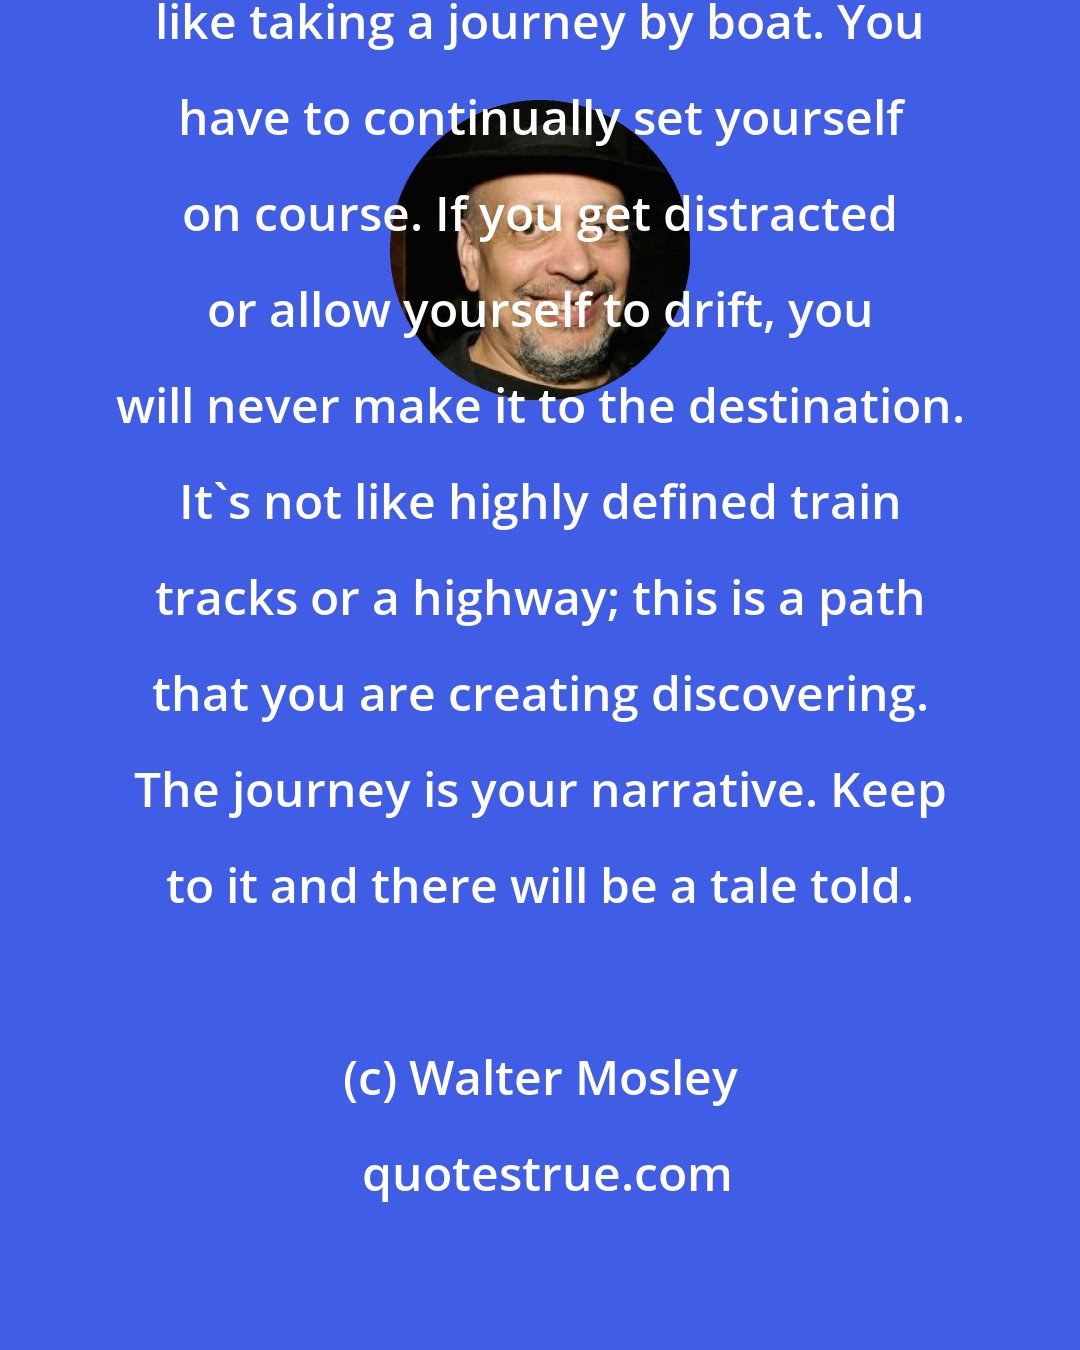 Walter Mosley: The process of writing a novel is like taking a journey by boat. You have to continually set yourself on course. If you get distracted or allow yourself to drift, you will never make it to the destination. It's not like highly defined train tracks or a highway; this is a path that you are creating discovering. The journey is your narrative. Keep to it and there will be a tale told.